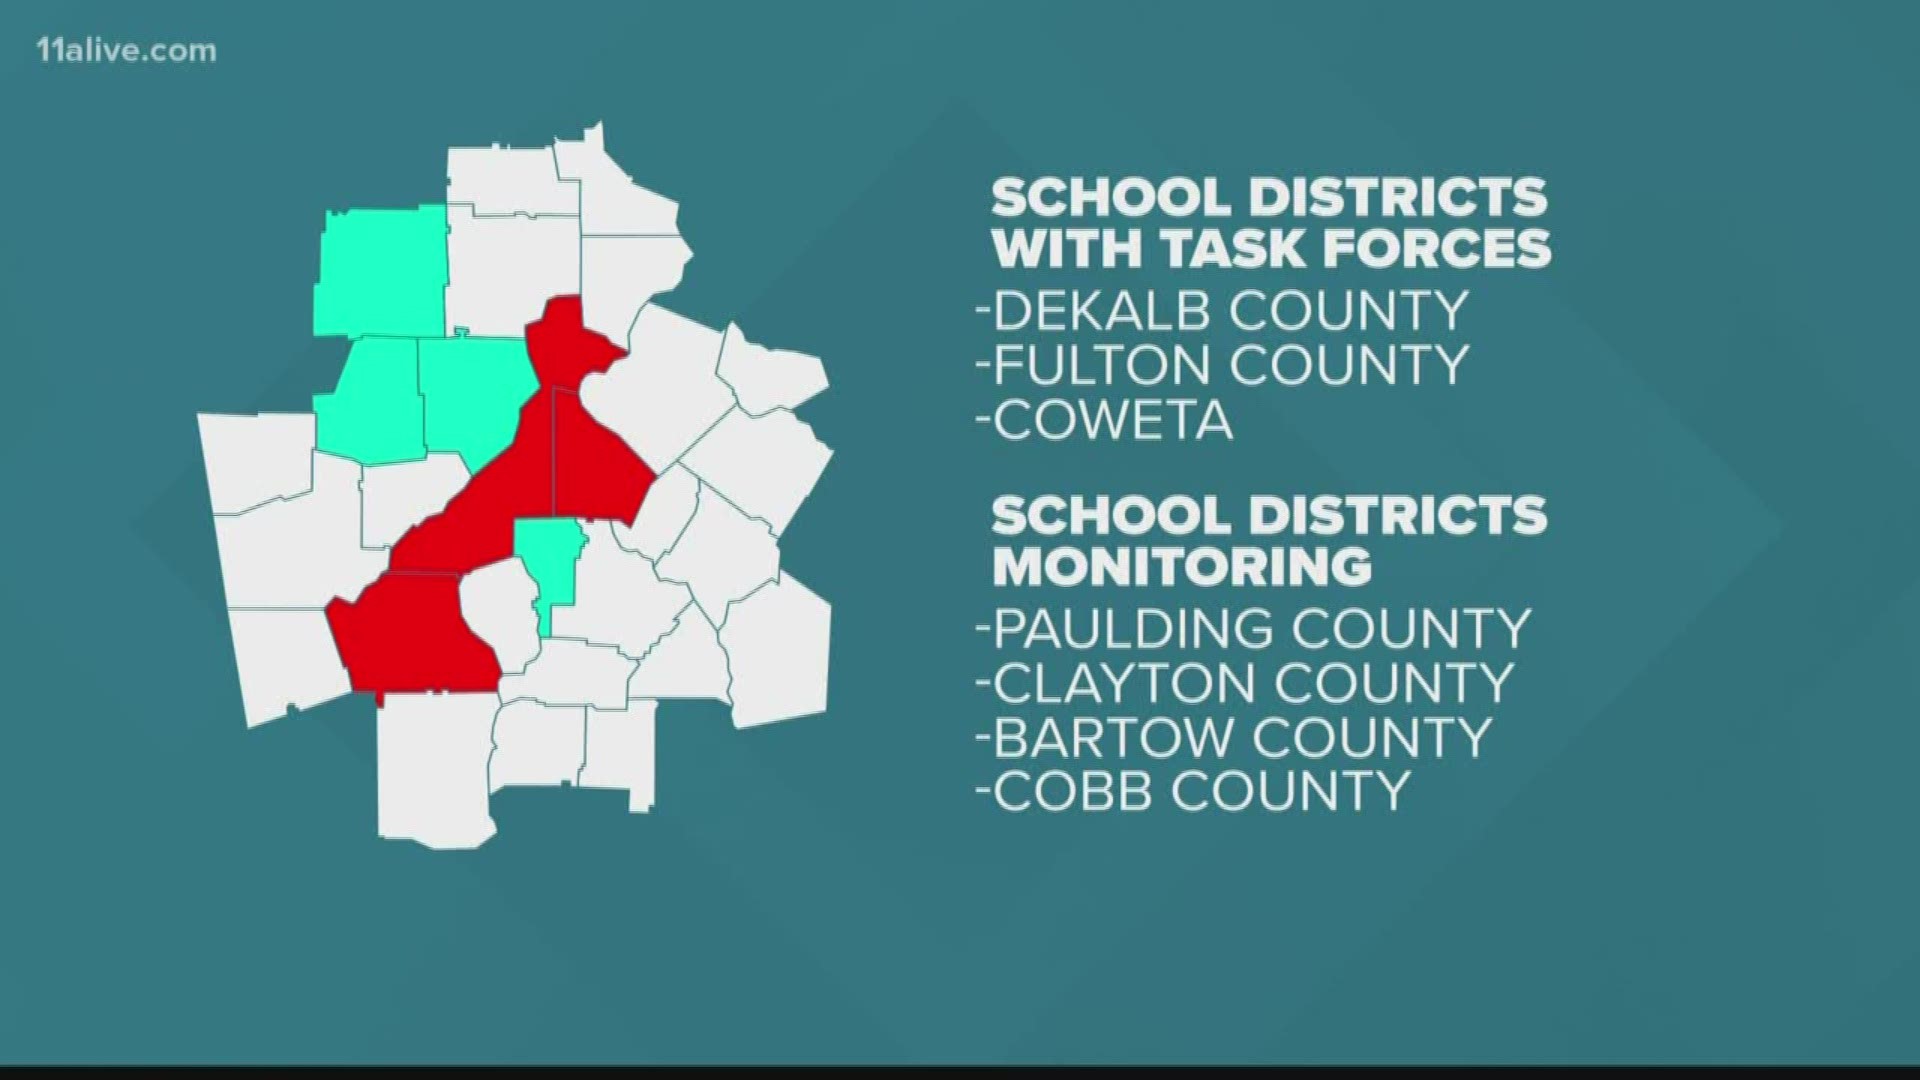 Here's what several districts are doing to keep its staff and students prepared.